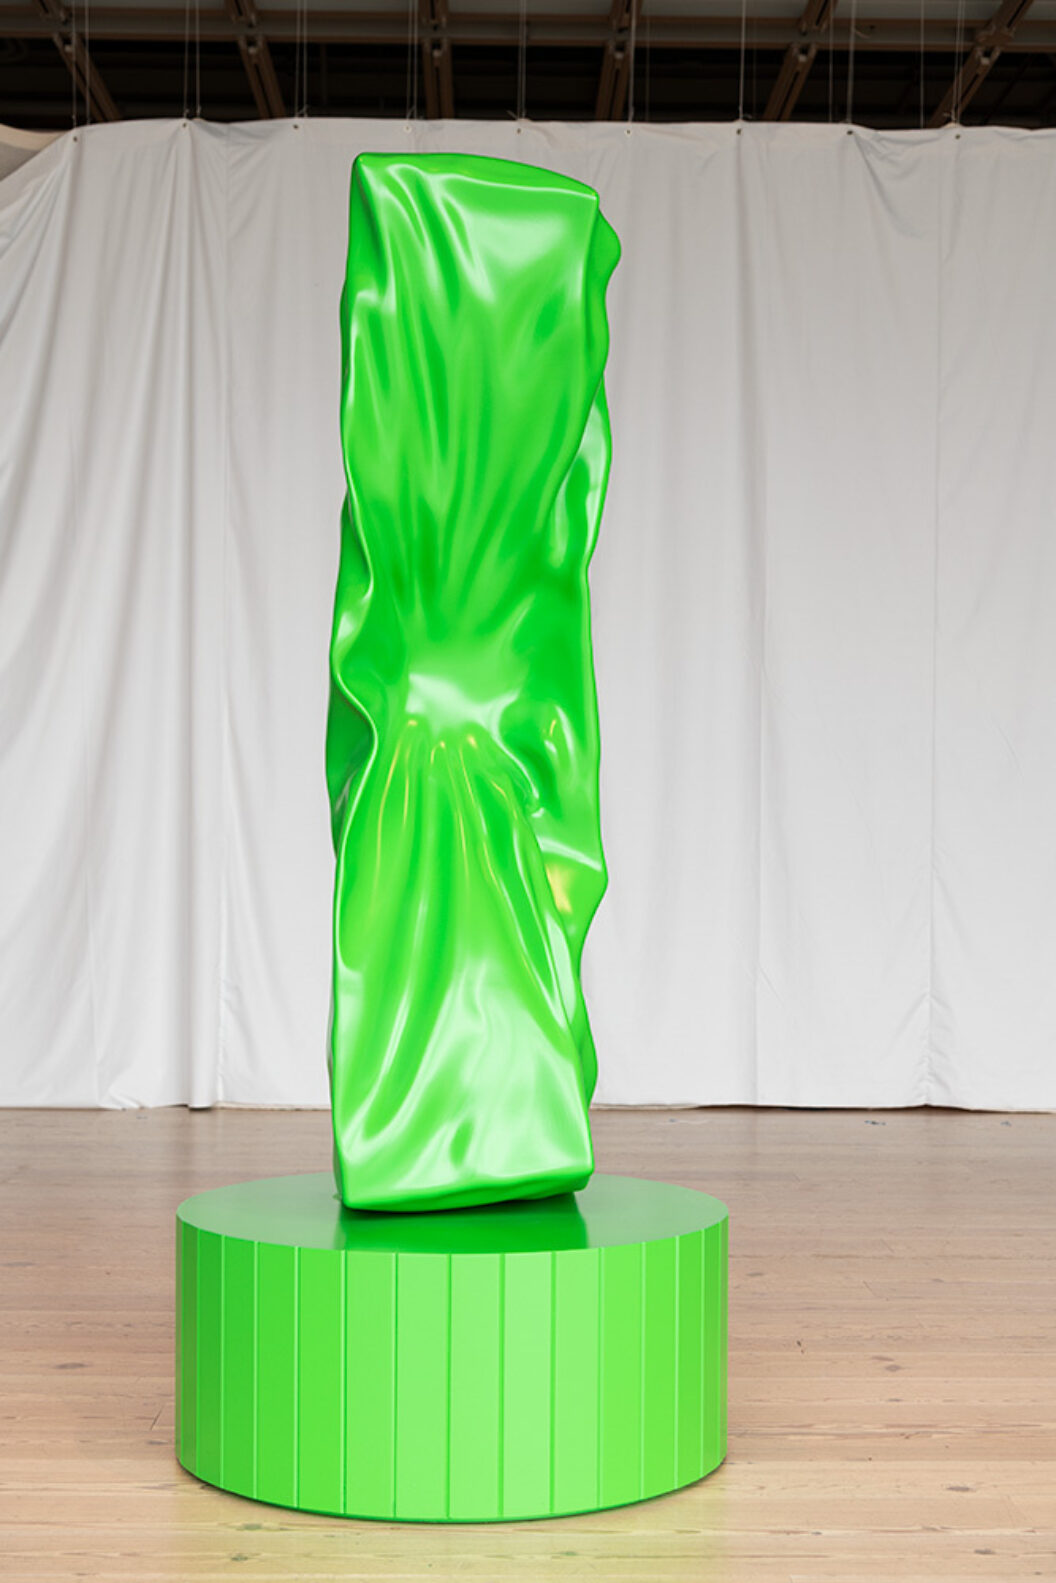 An upright rectangular green sculpture with a compressed dent in its middle photographed against a white curtain.